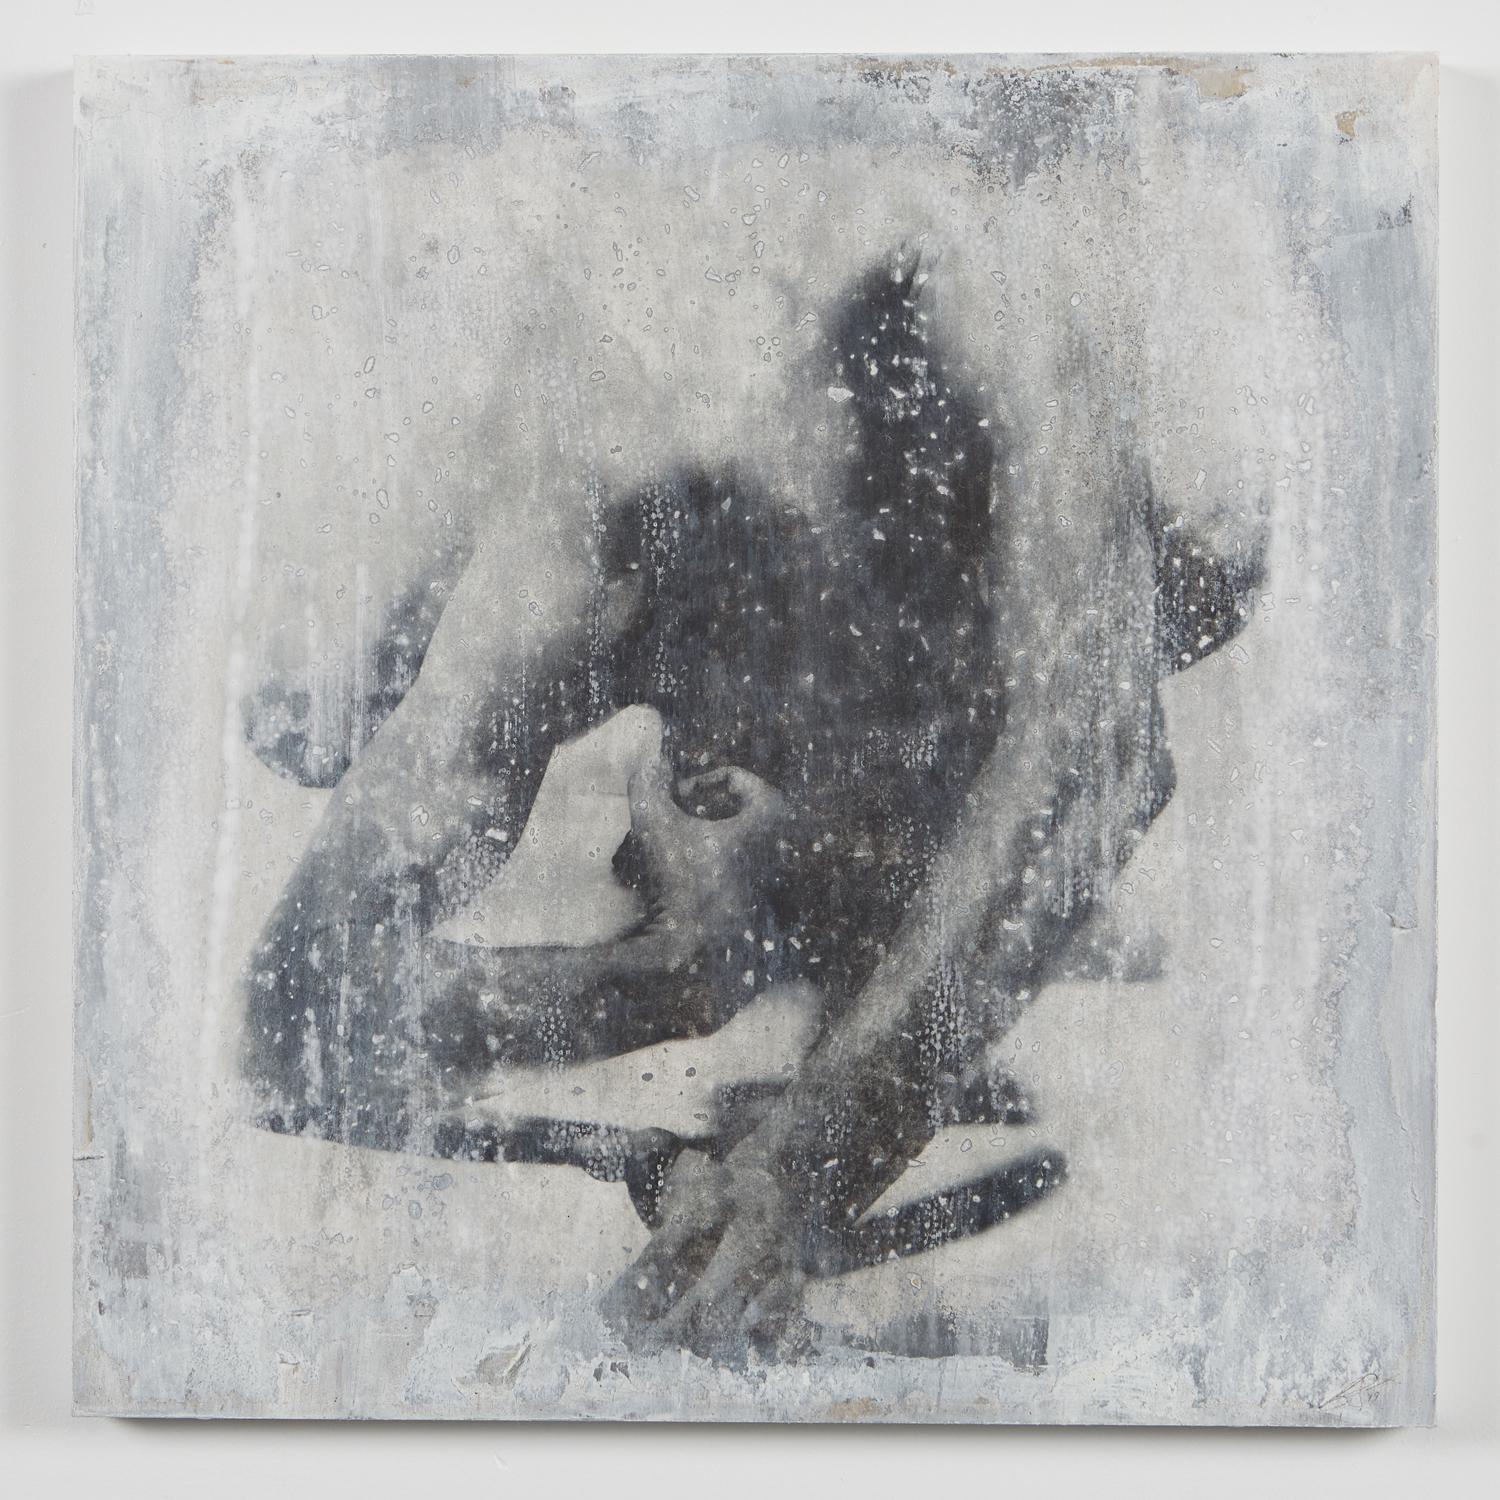 “Untitled: Movement 2” by Ben Cope
2019
Photo on deconstructed paper on wood panel with oils and paint pigments 
24” X 24” inch

Ben is a Georgia native graduating from Columbus State University with a BFA in ceramic sculpture and photography. After